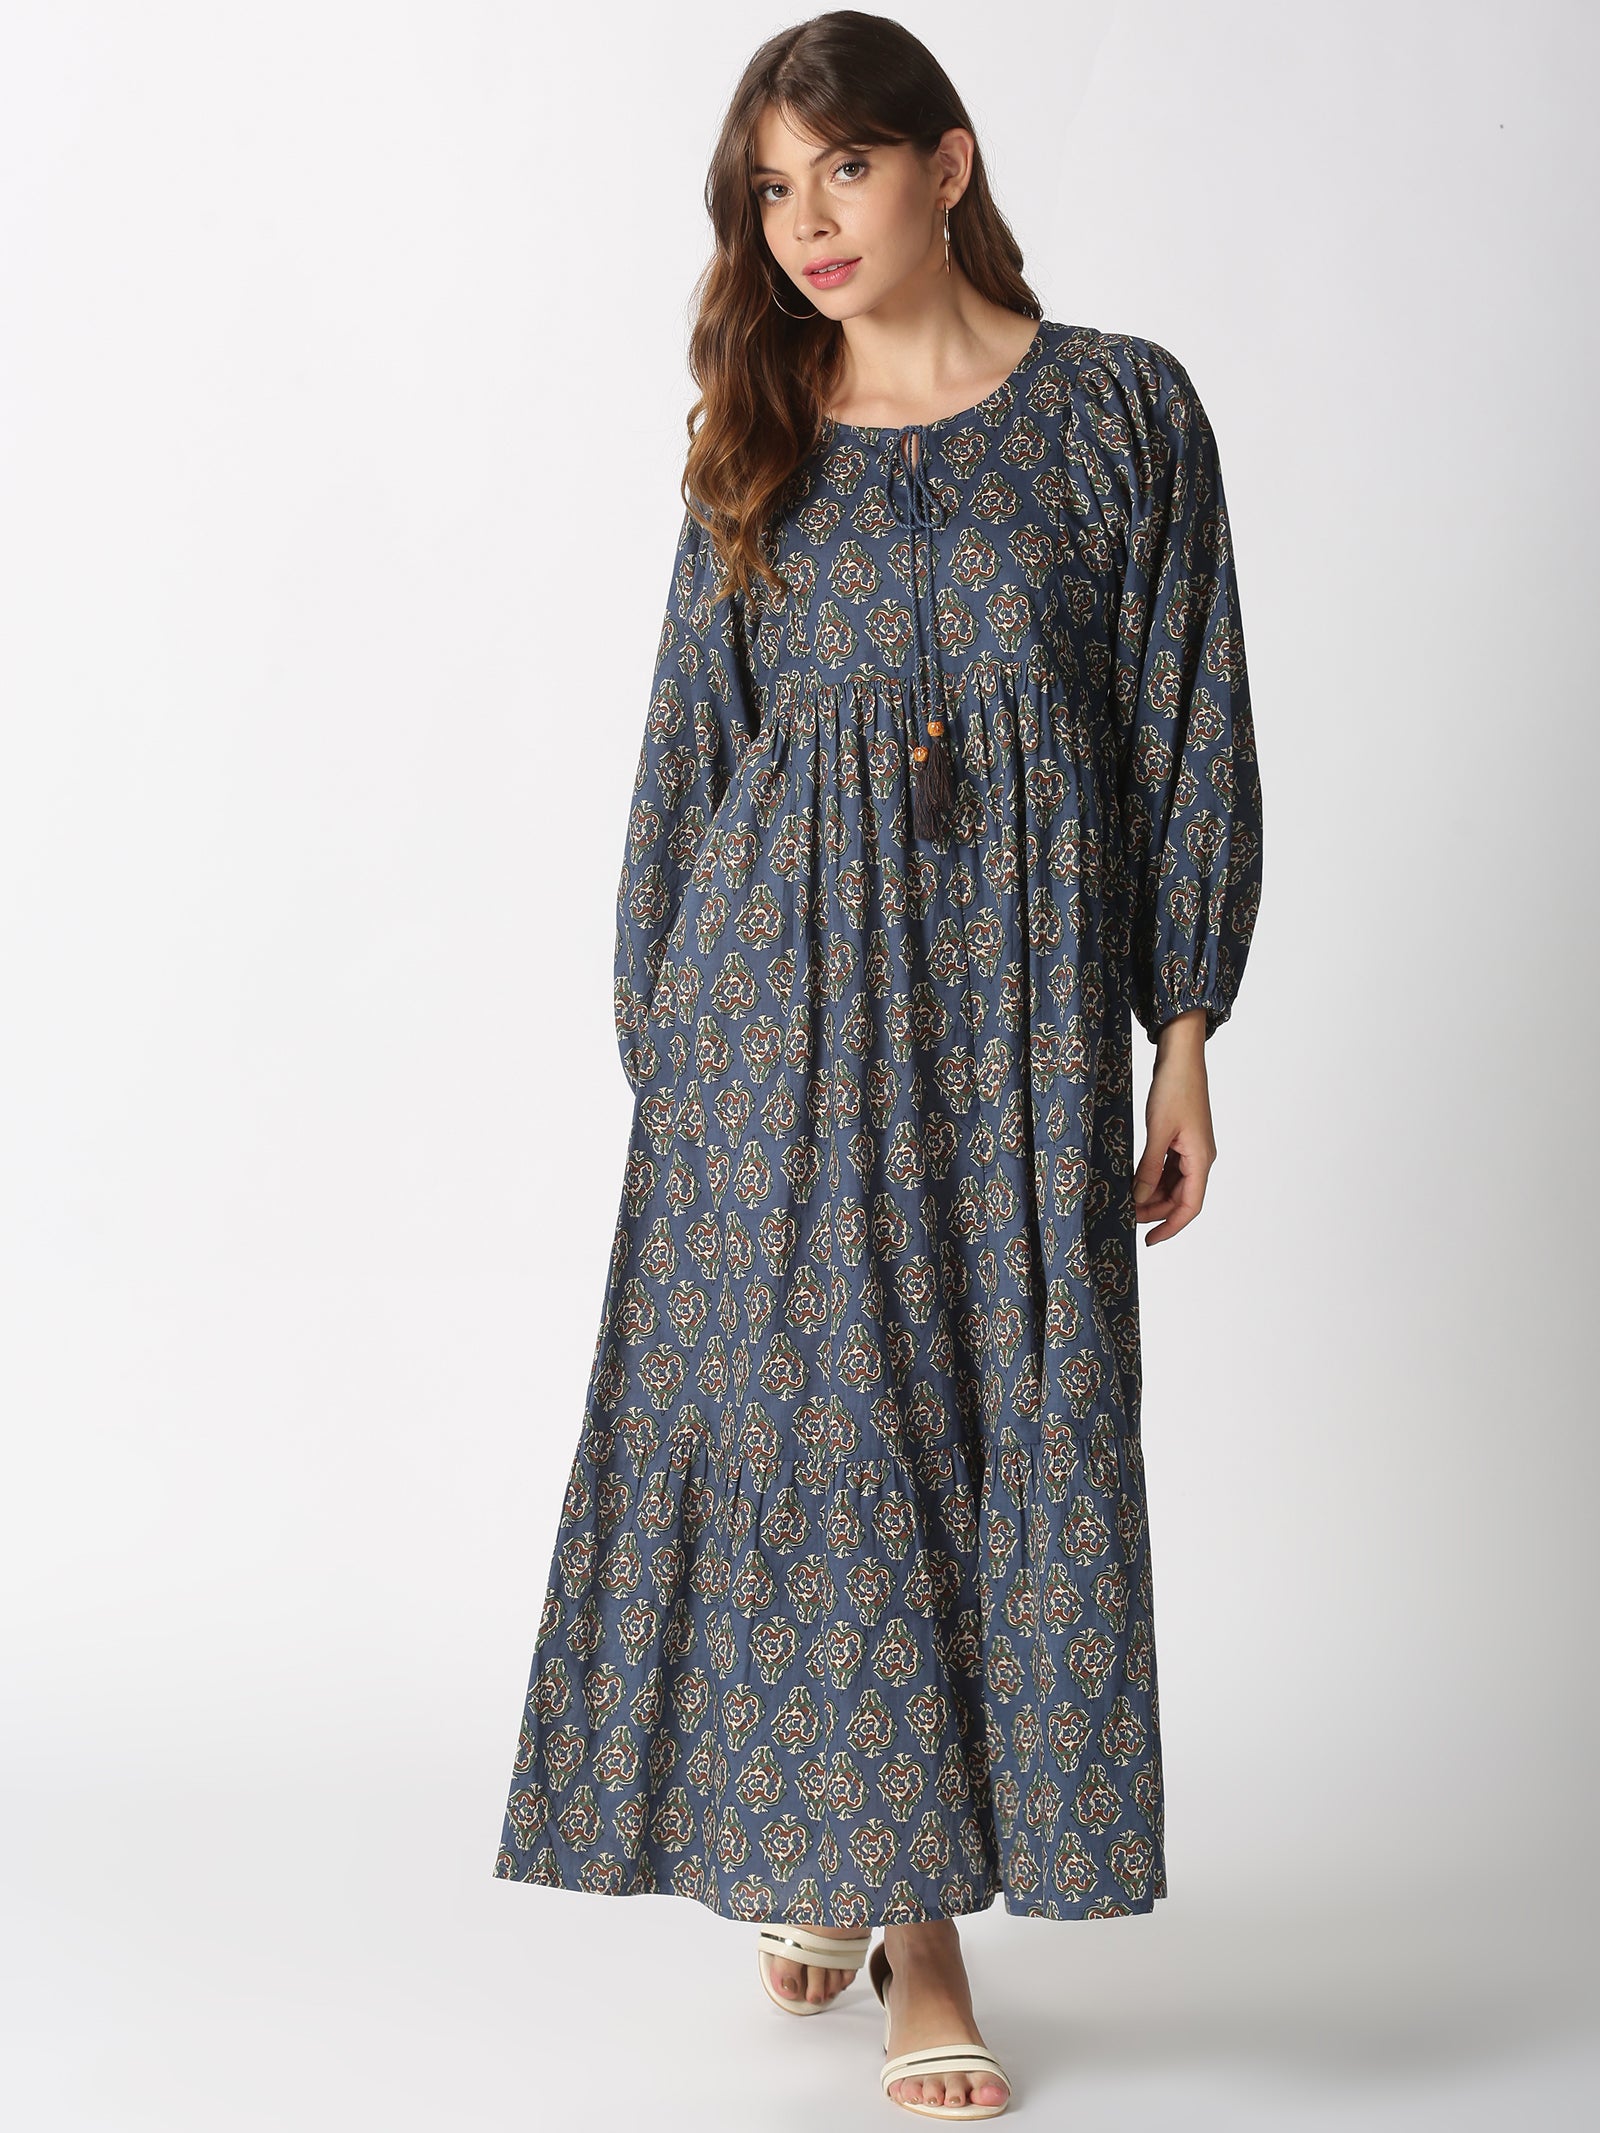 Blue Ethnic Motifs Printed Tiered A-line Maxi Dress with Tie-up Neck